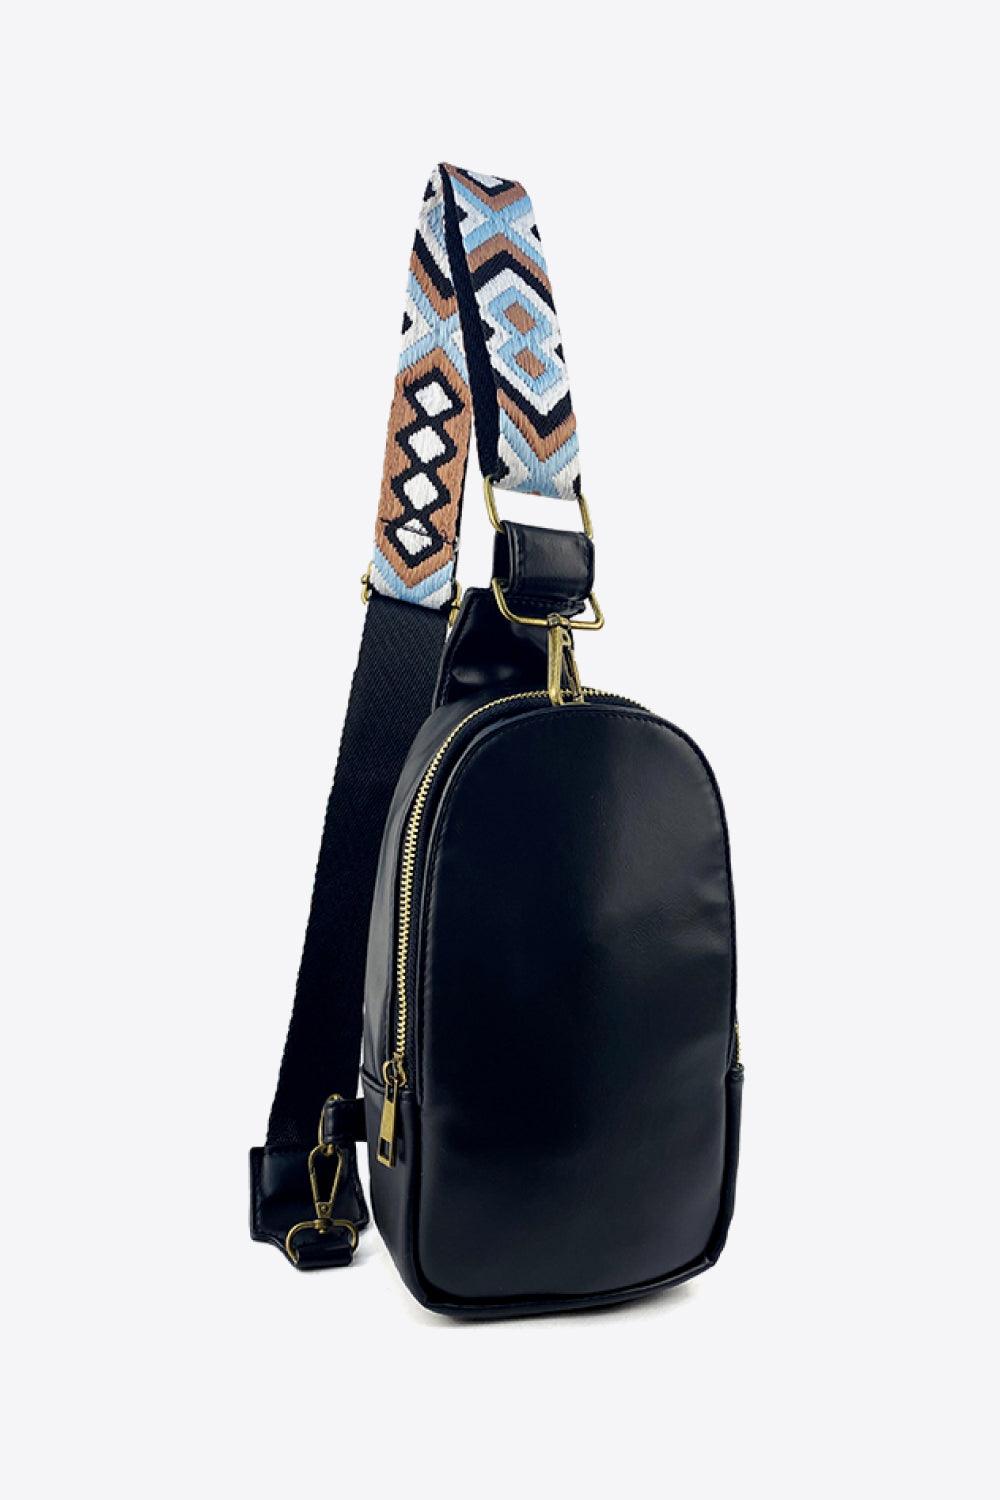 Stylish Adjustable PU Leather Sling Bag - Look Great On the Go!